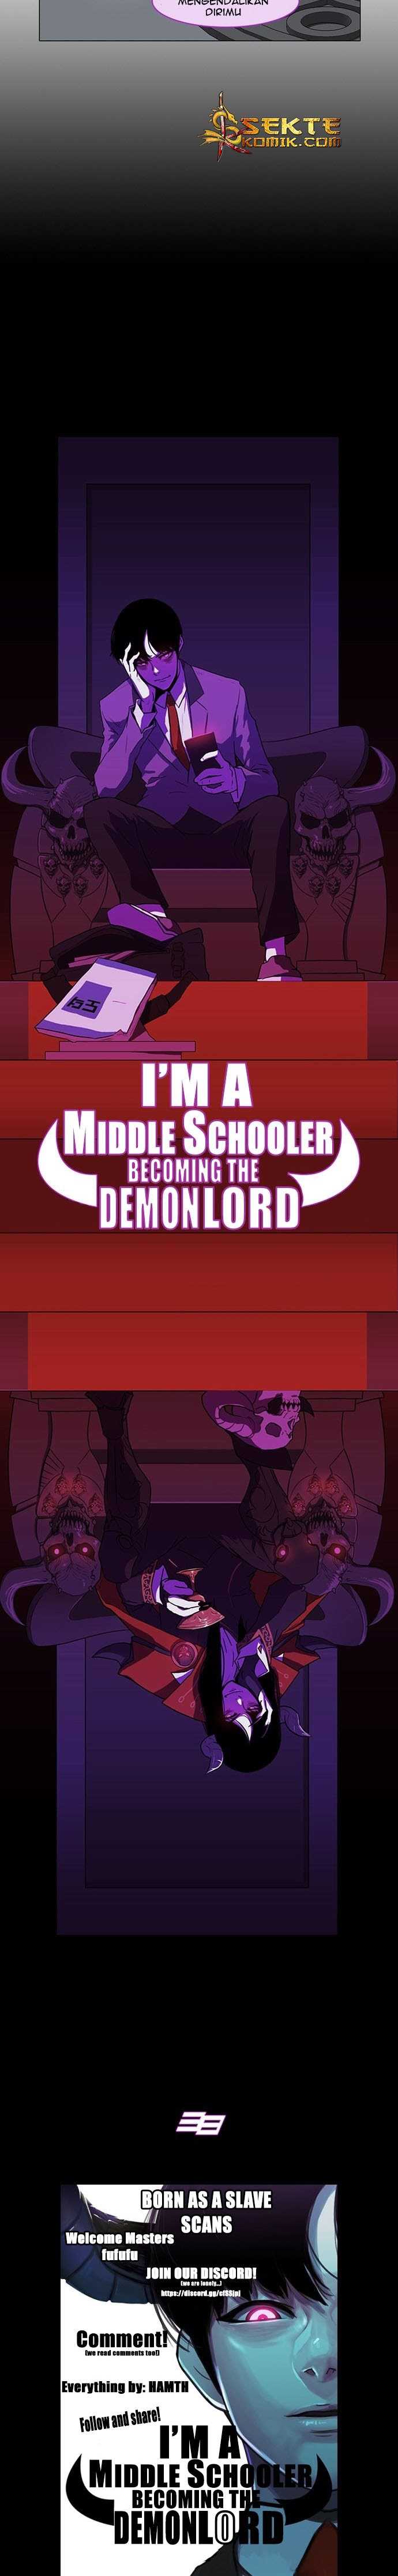 I’m A Middle Schooler Becoming The Demon Lord Chapter 2